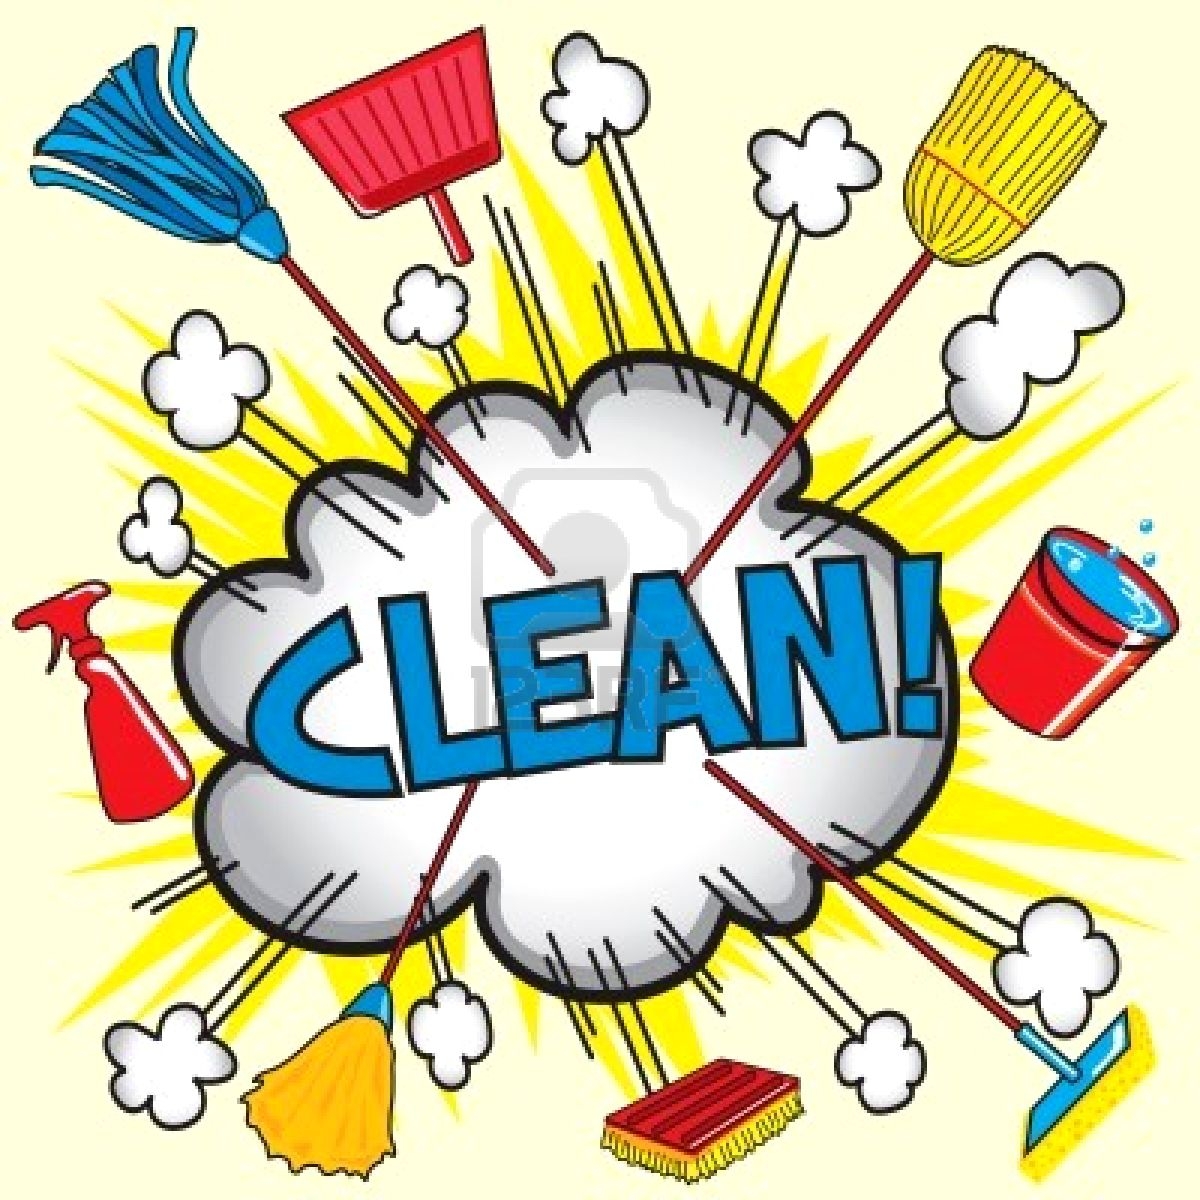 clean office clipart